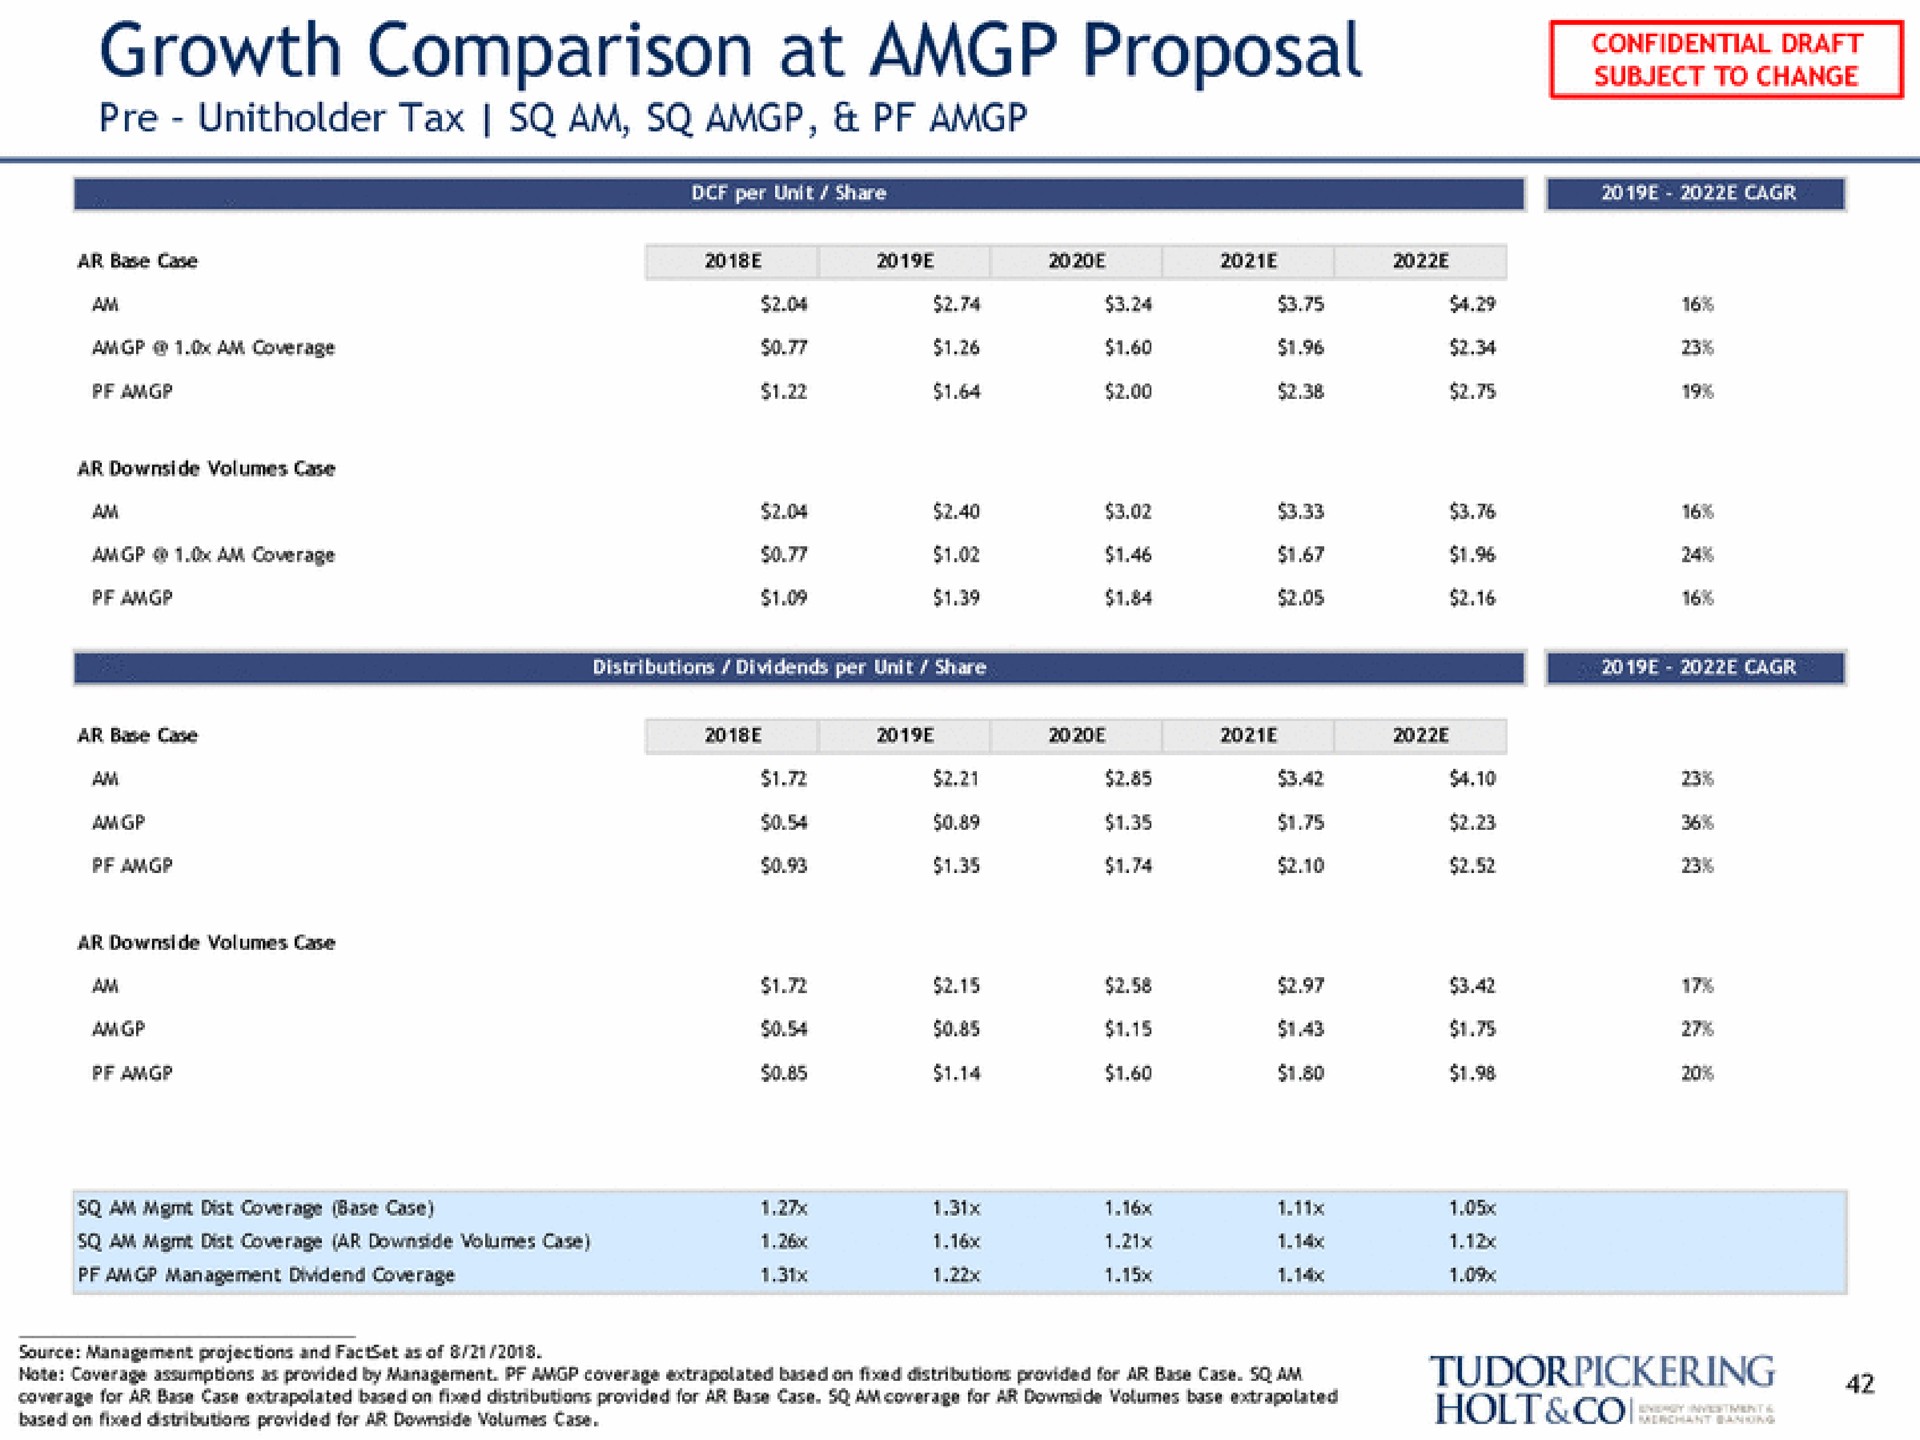 growth comparison at proposal | Tudor, Pickering, Holt & Co